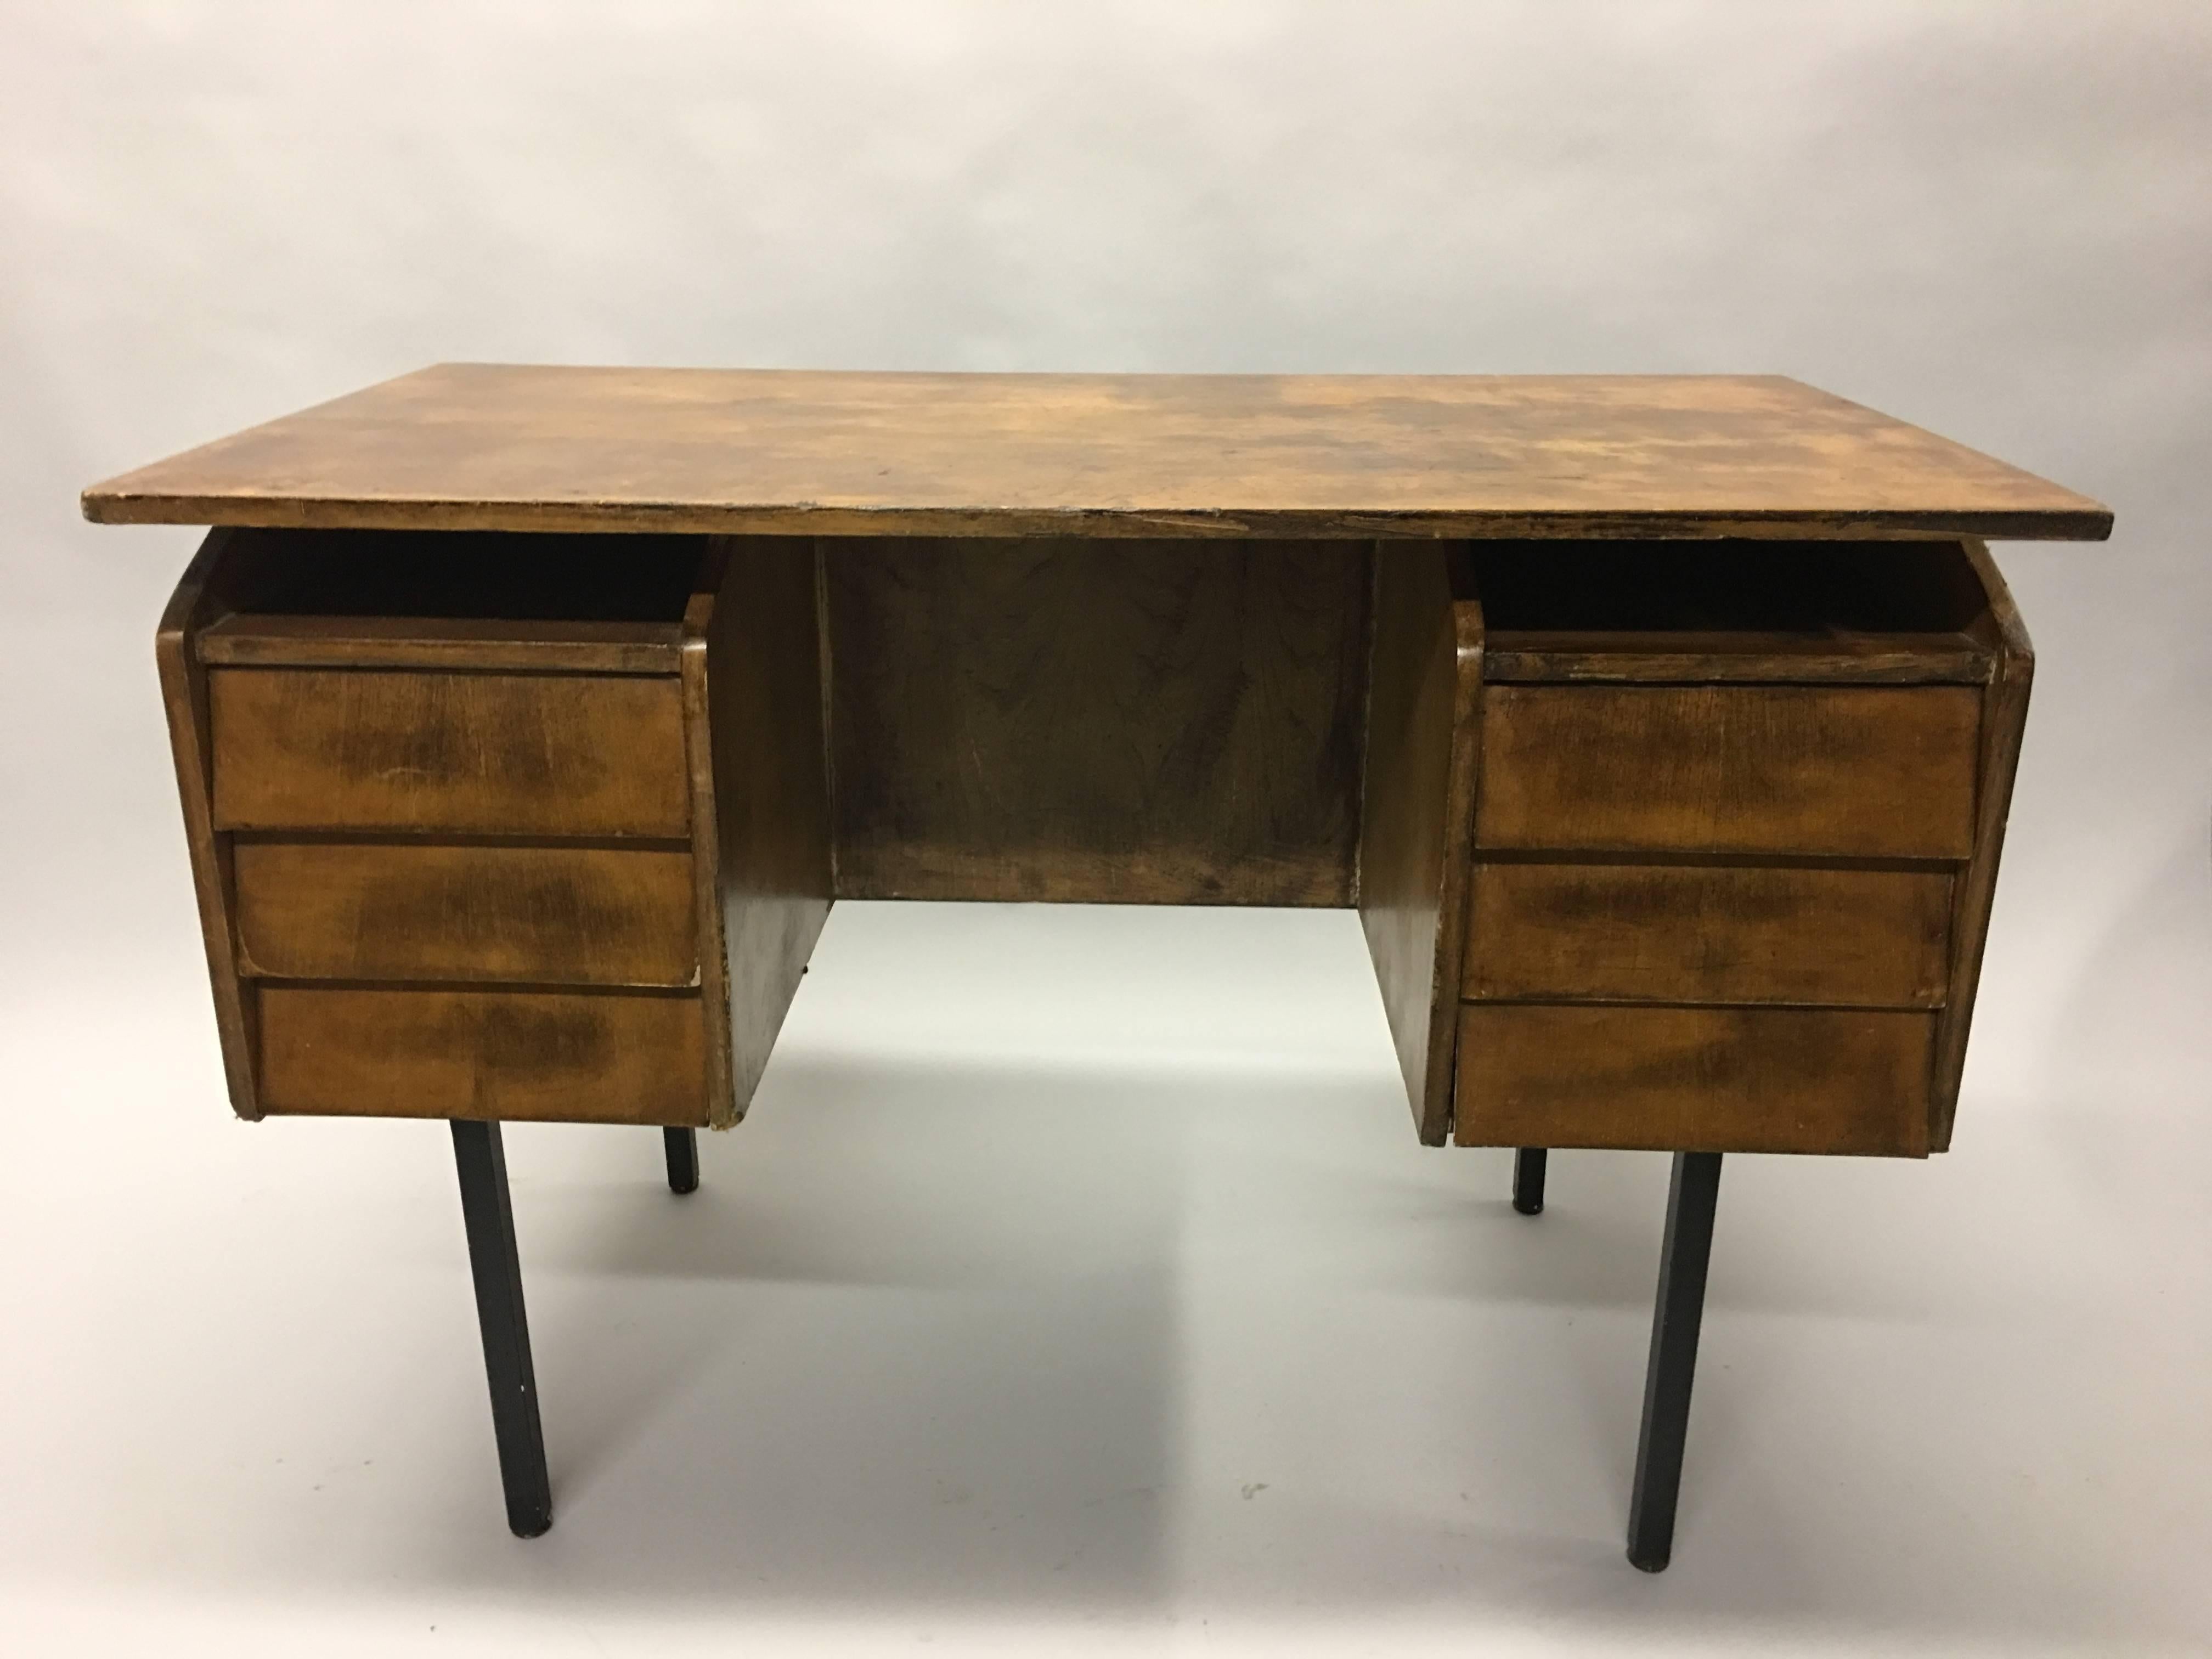 Elegant German modernist desk / writing table by Voss with a cantilevered wood top and three wood drawers on each side supported by four black metal legs. A refined, modern composition of materials and form!

Labeled: Voss, Schreibtisch, Germany